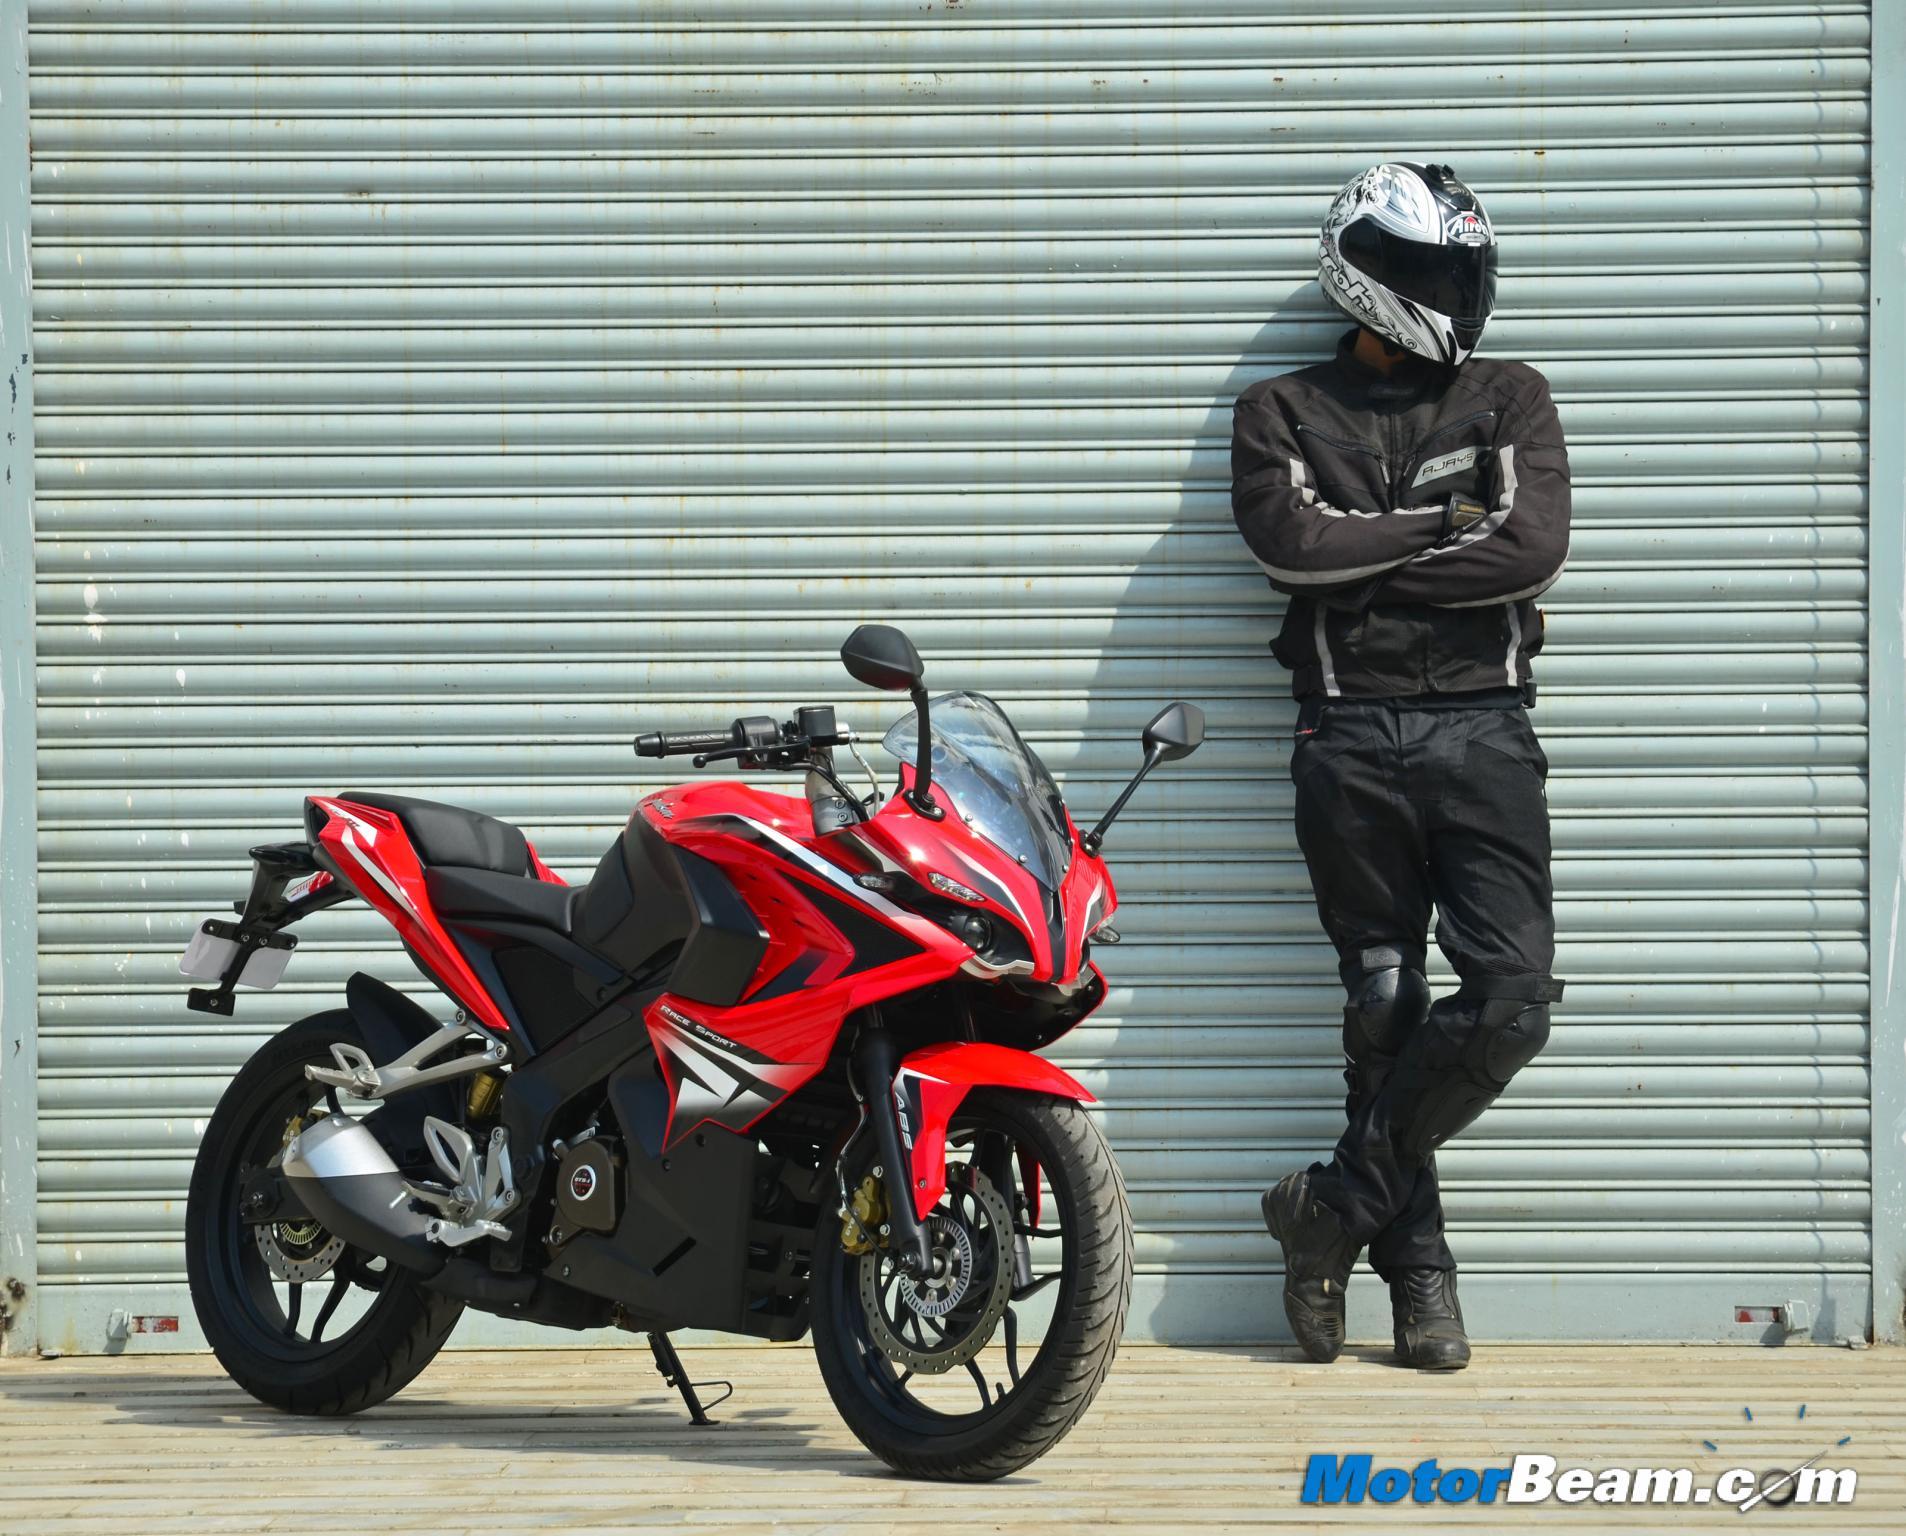 Bajaj Offers Pulsar RS 200 At An EMI Scheme Of Rs. 3499